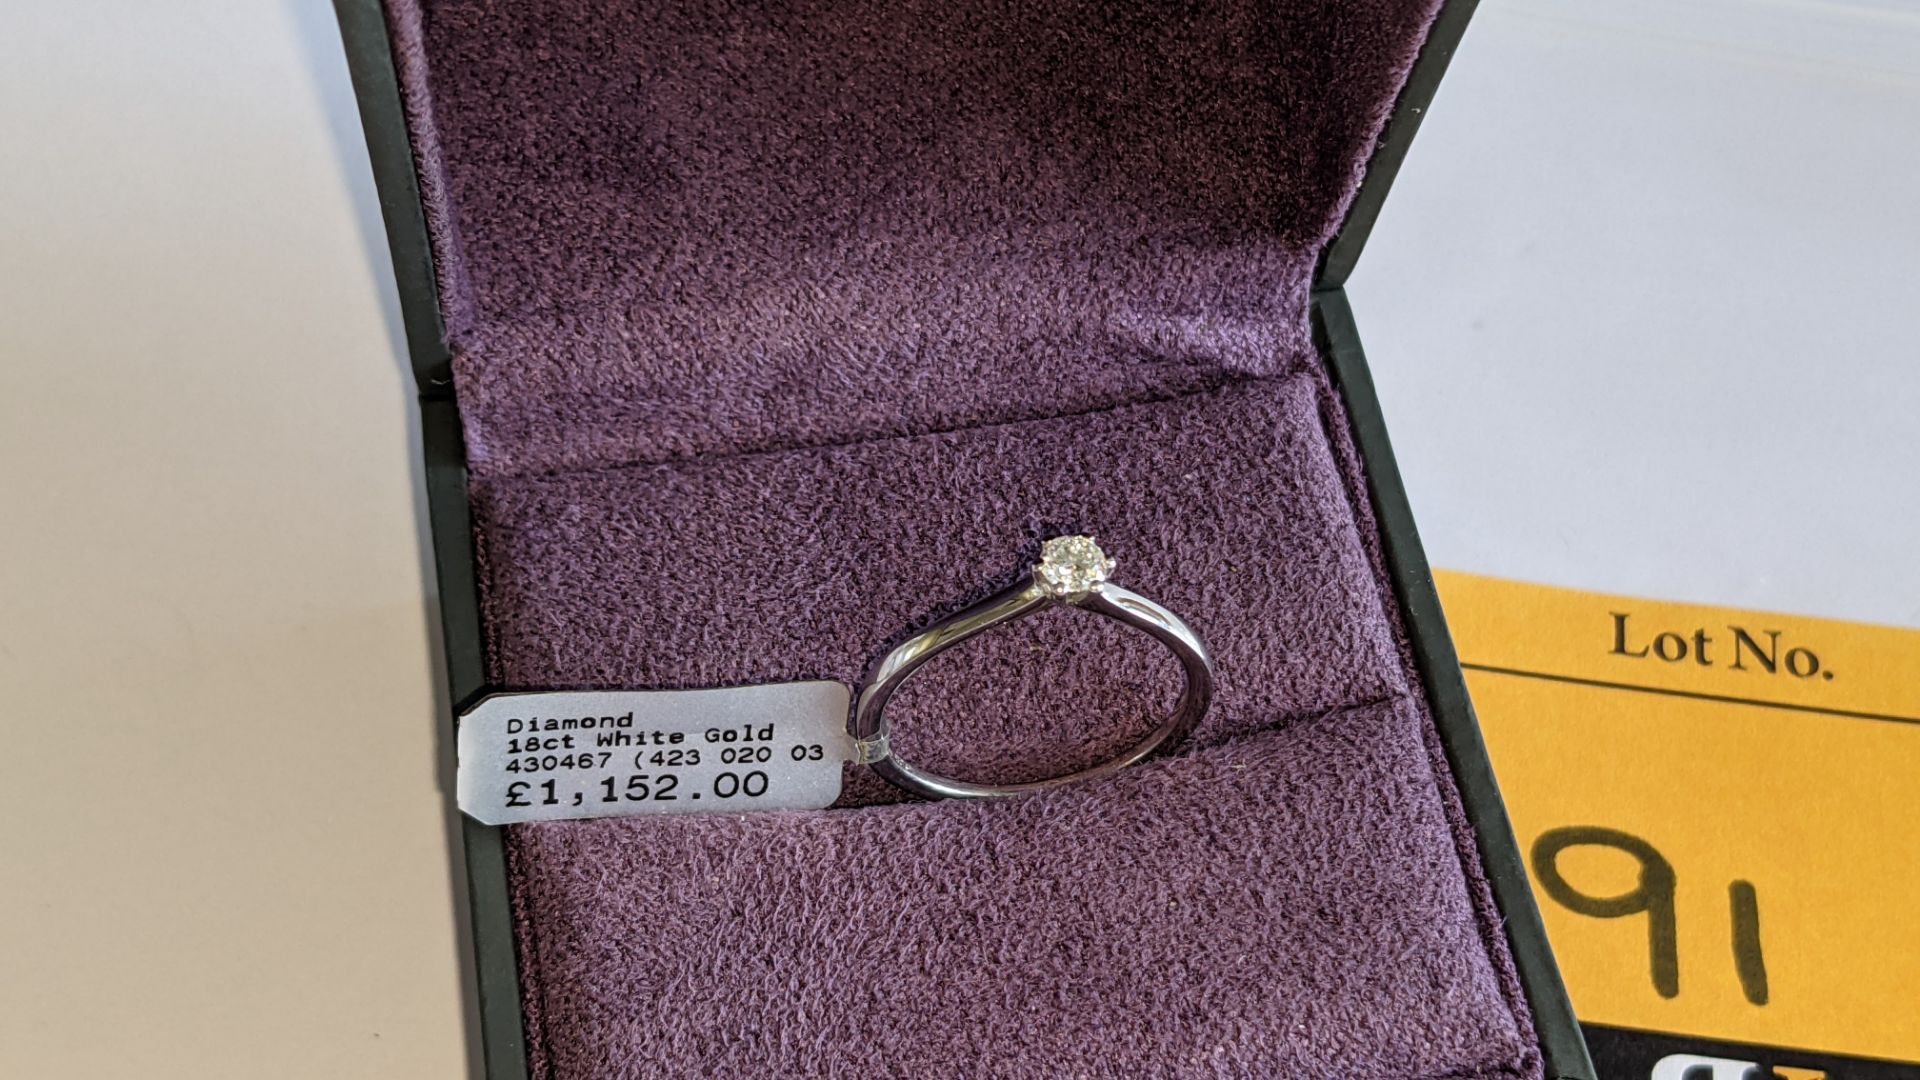 18ct white gold & diamond ring with 0.20ct G/Si brilliant cut diamond RRP £1,152 - Image 4 of 17